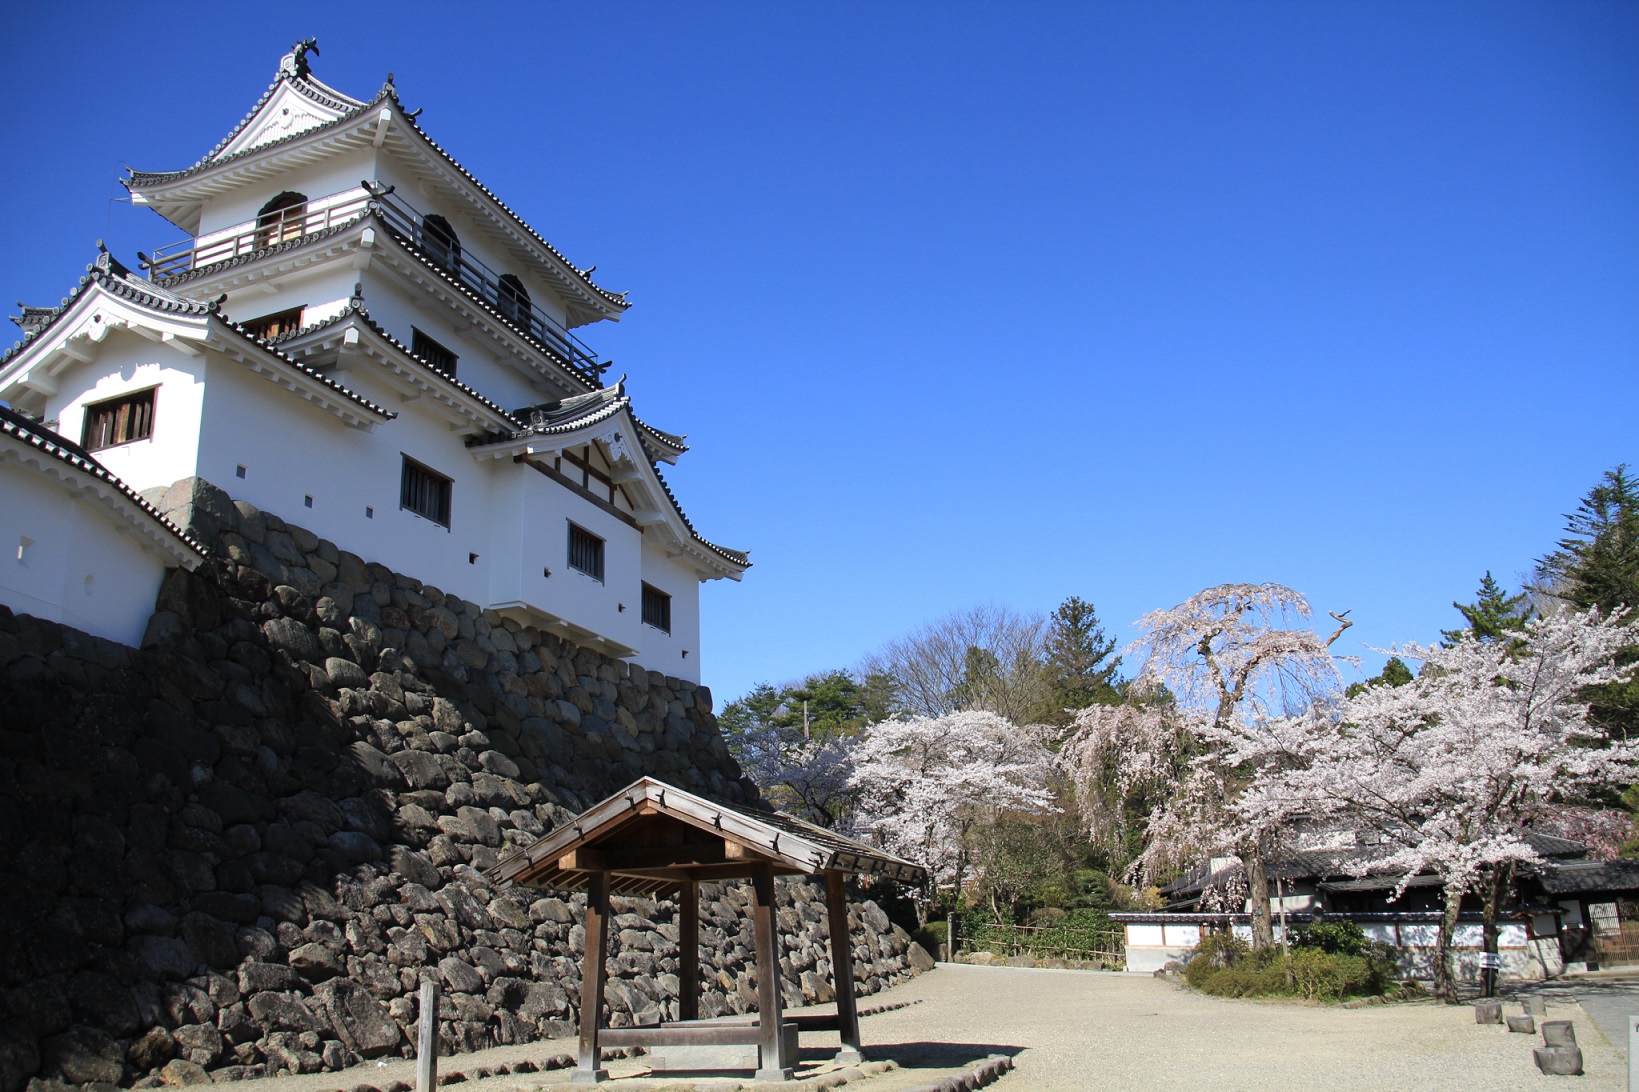 Tour around 7 temples in Shiroishi castle